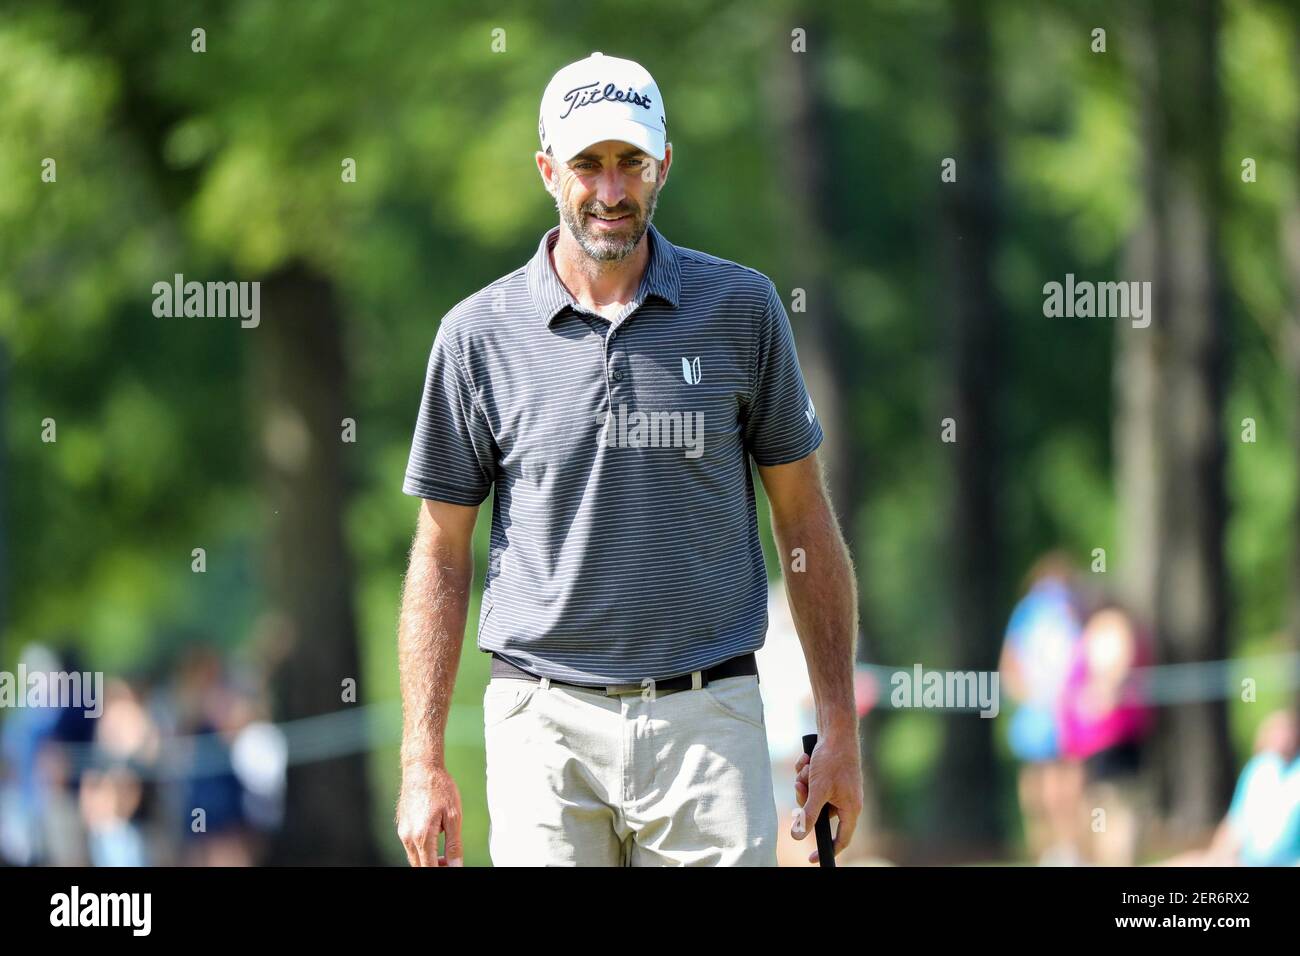 May 4, 2018; Charlotte, NC, USA; Geoff Ogilvy during the second round of the Wells Fargo Championship golf tournament at Quail Hollow Club. Mandatory Credit: Jim Dedmon-USA TODAY Sports Stock Photo